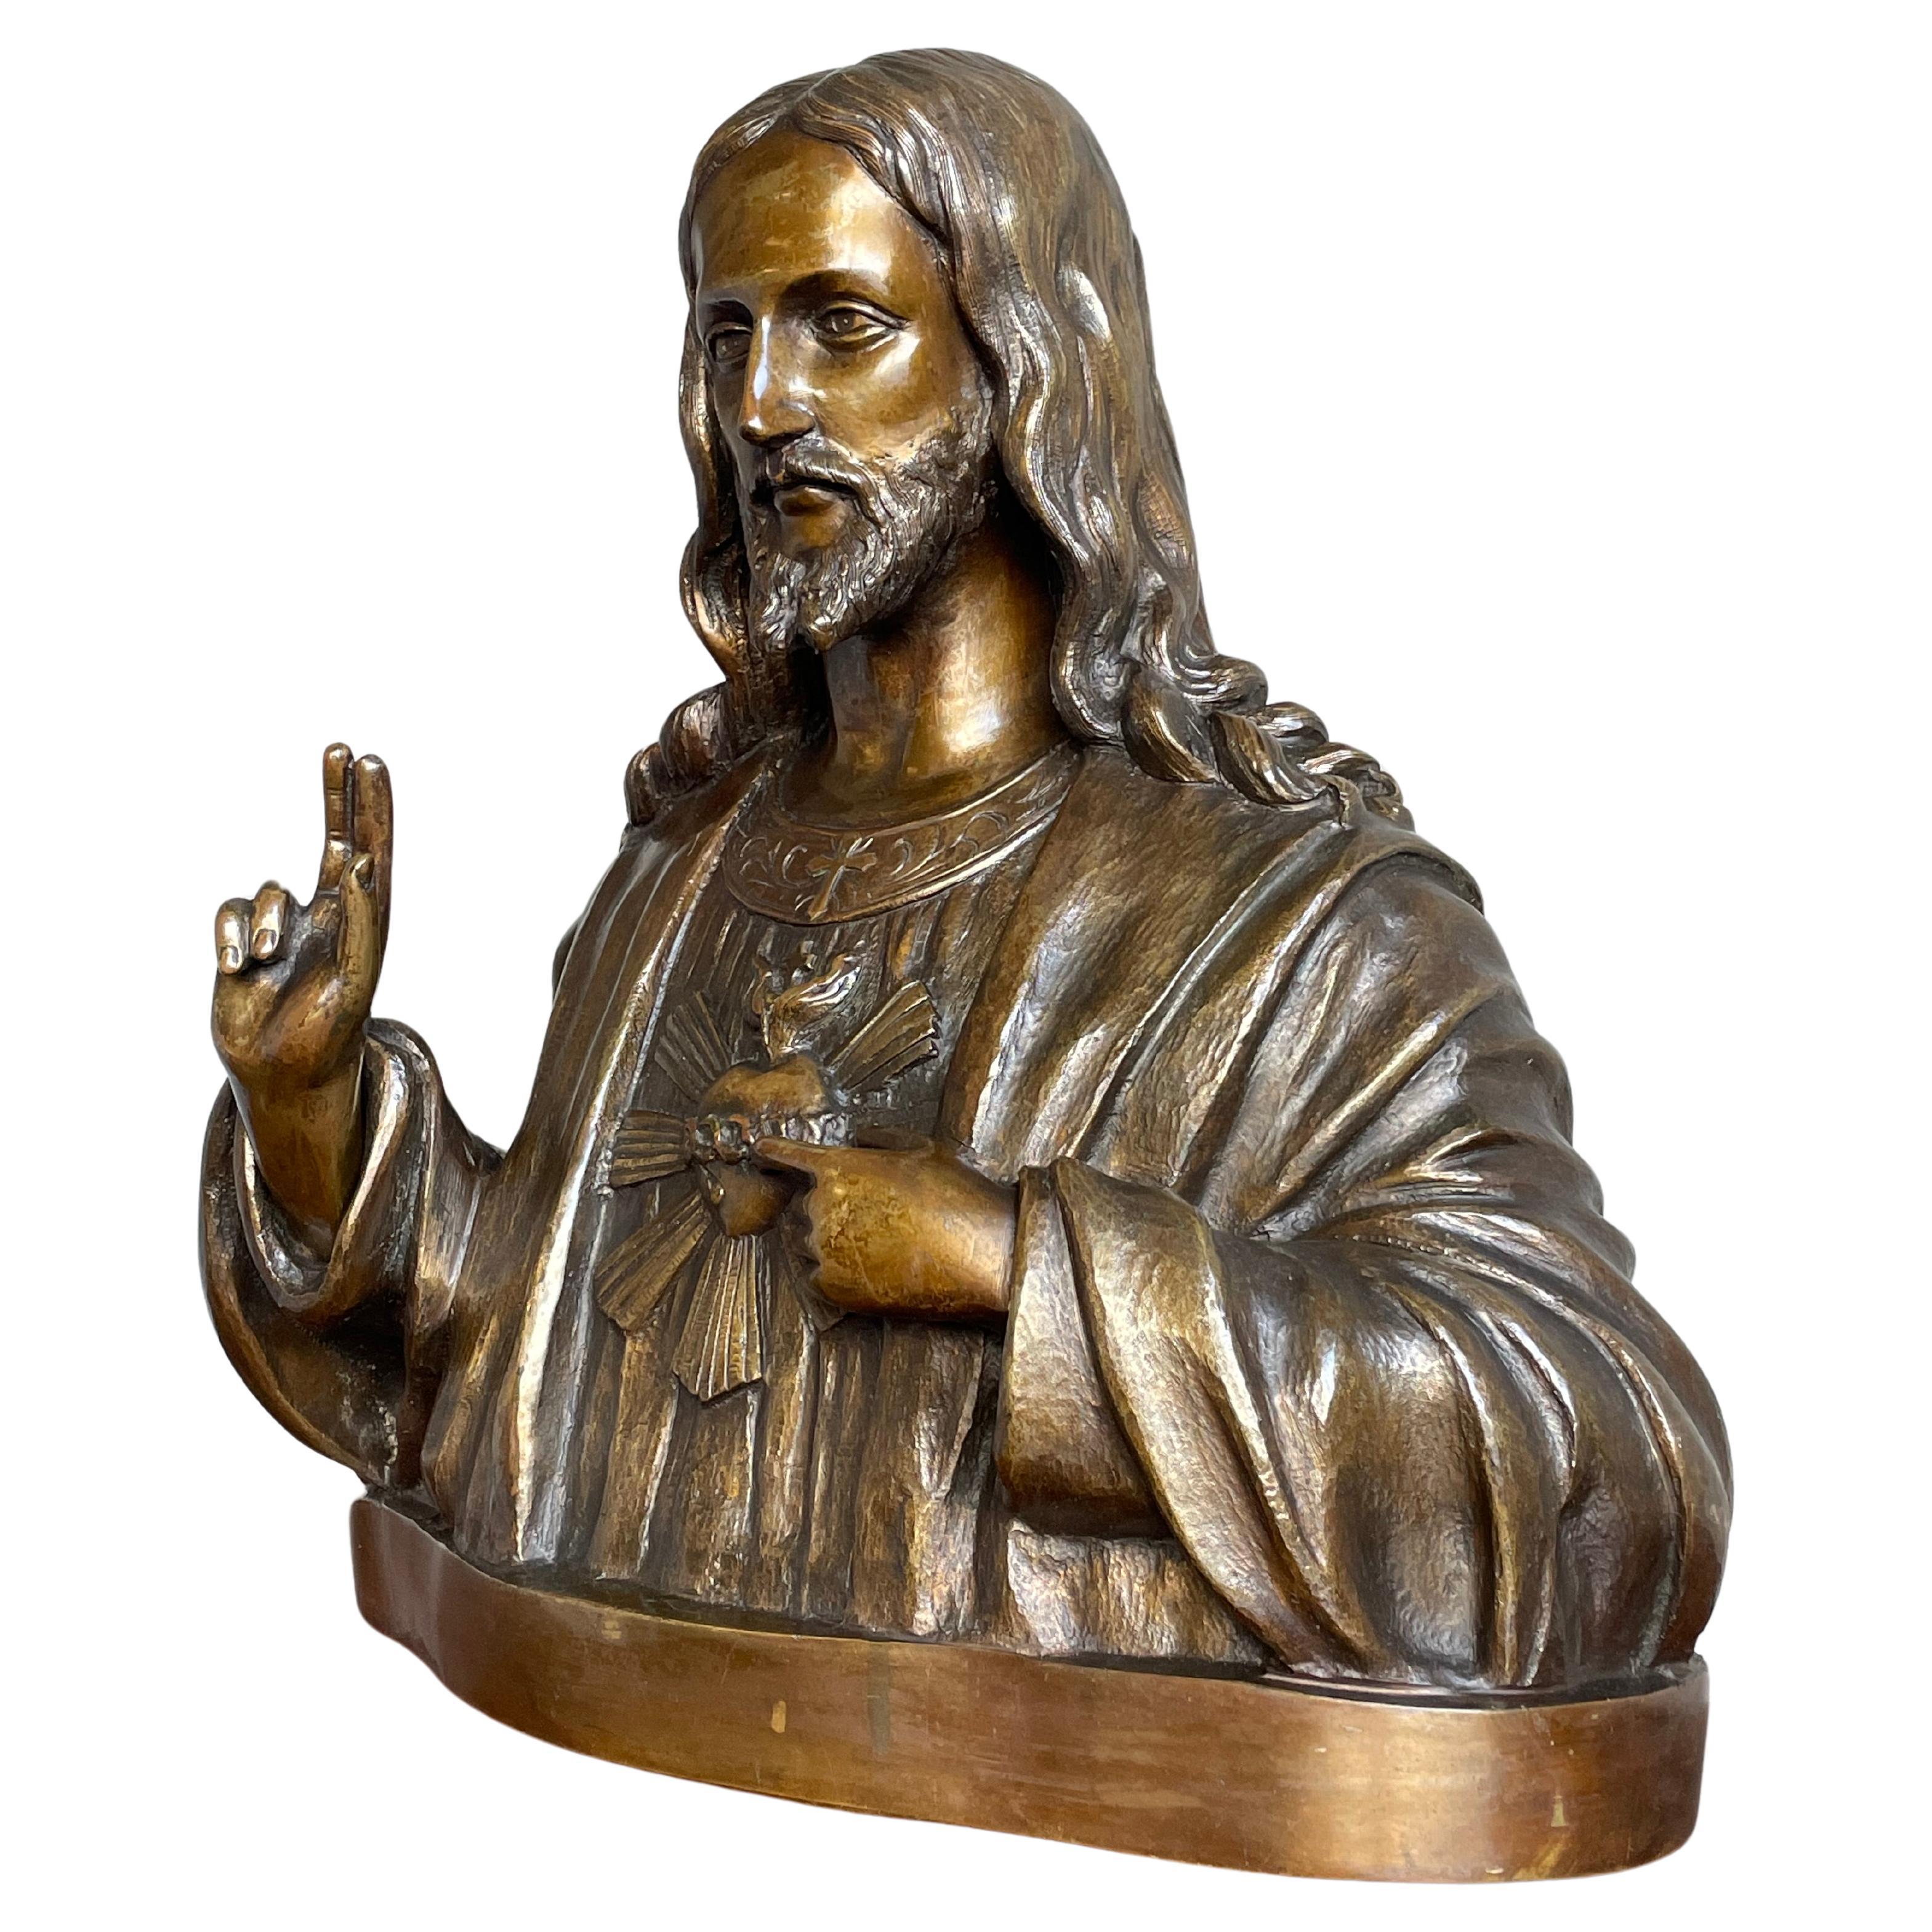 Rare Antique Bronze Holy Heart Sculpture / Bust of Our Lord Jesus Christ 1920 For Sale